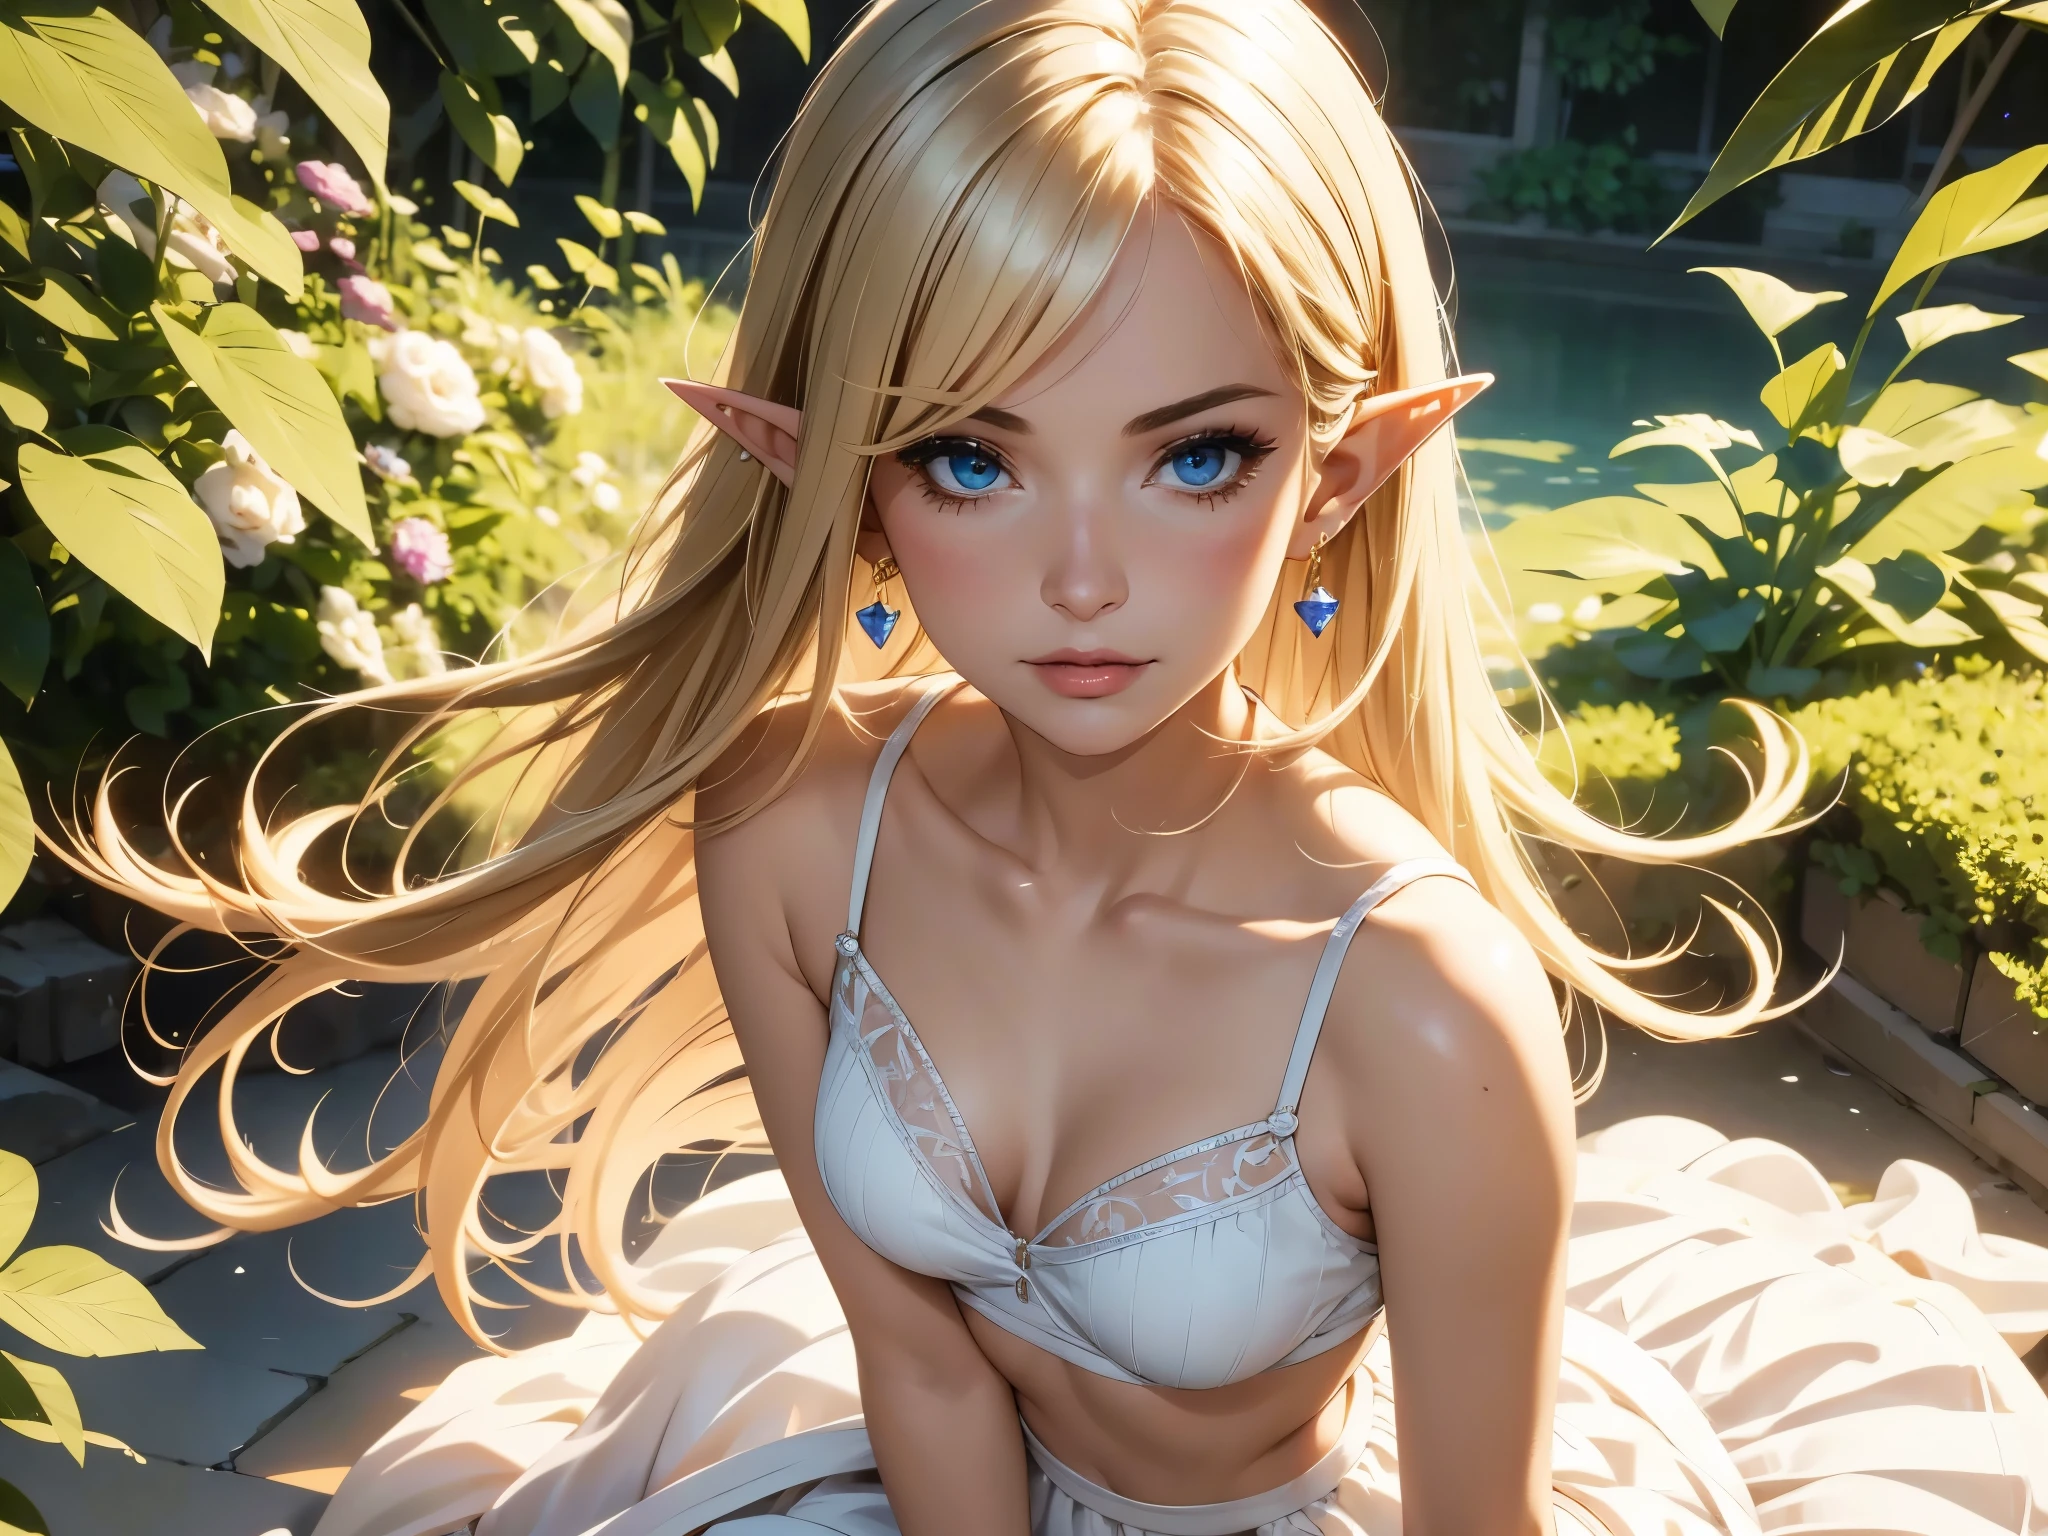 1 girl, Beautiful elf lady, blonde Long straight hair, upturn elf pointy ears, sexy figure, hot body, very beautiful face, detailed face, delicate eyes, detailed pupil, beautiful and delicate lips, blush, shy, heart, in love, white camisole long skirt, Simple and stylish, small crystal earrings, hand drawn animation, high detailed, outdoor, symmetrical clothes, best quality, masterpiece, retina, 8k, highres